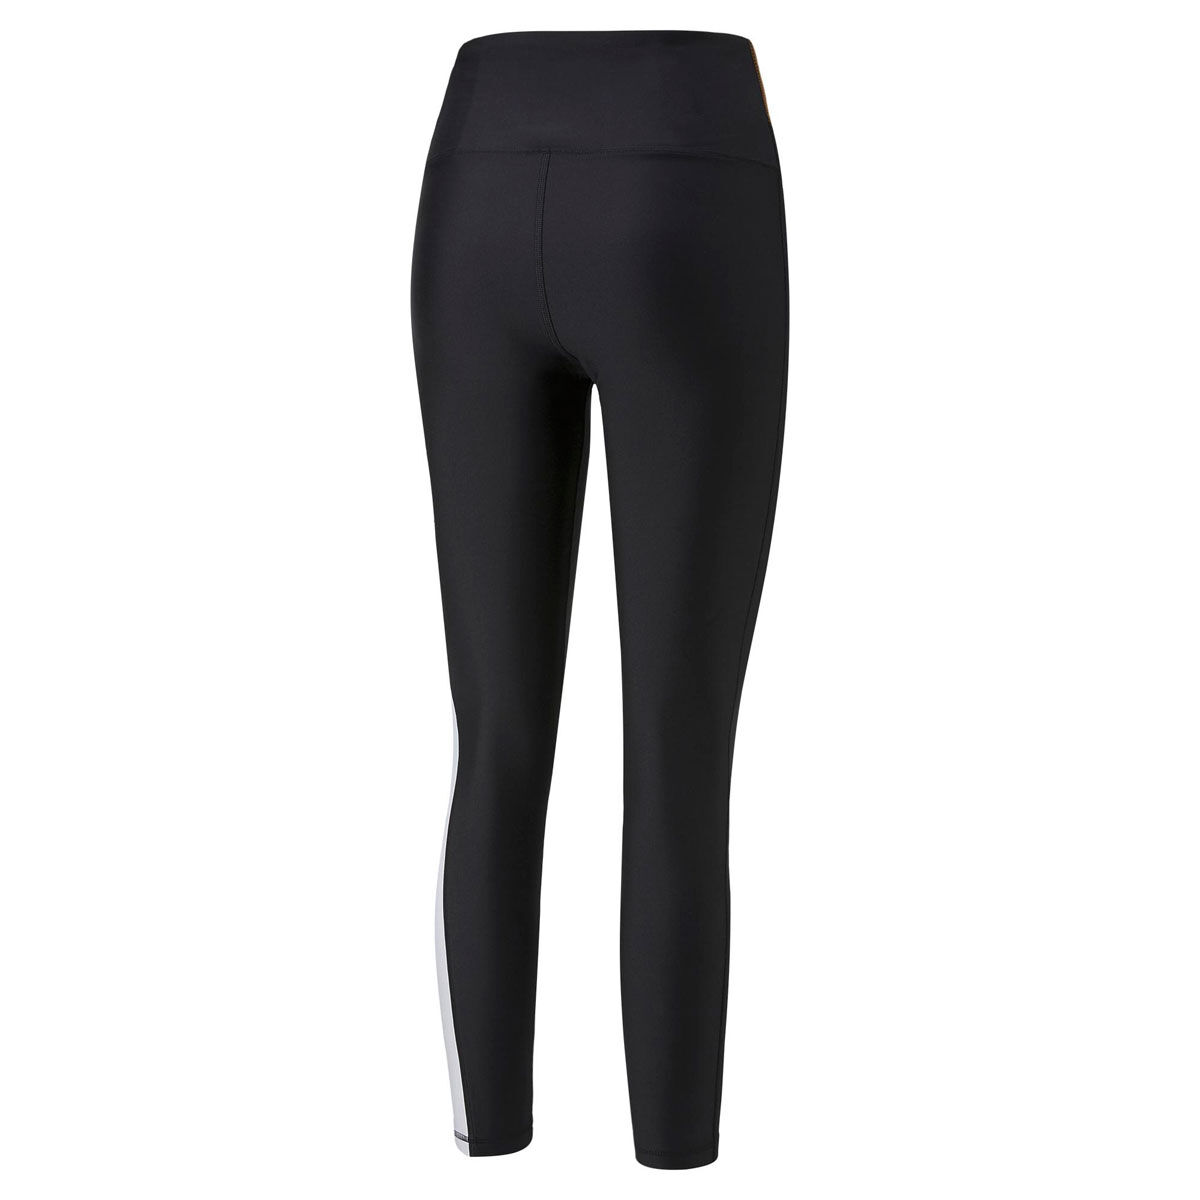 Wave166® Womens Training Leggings Womens Leggings Laides Yoga Pants With Pockets High Waisted Tummy Control Stretch Workout Fitness Running Tights Leggings Trousers 